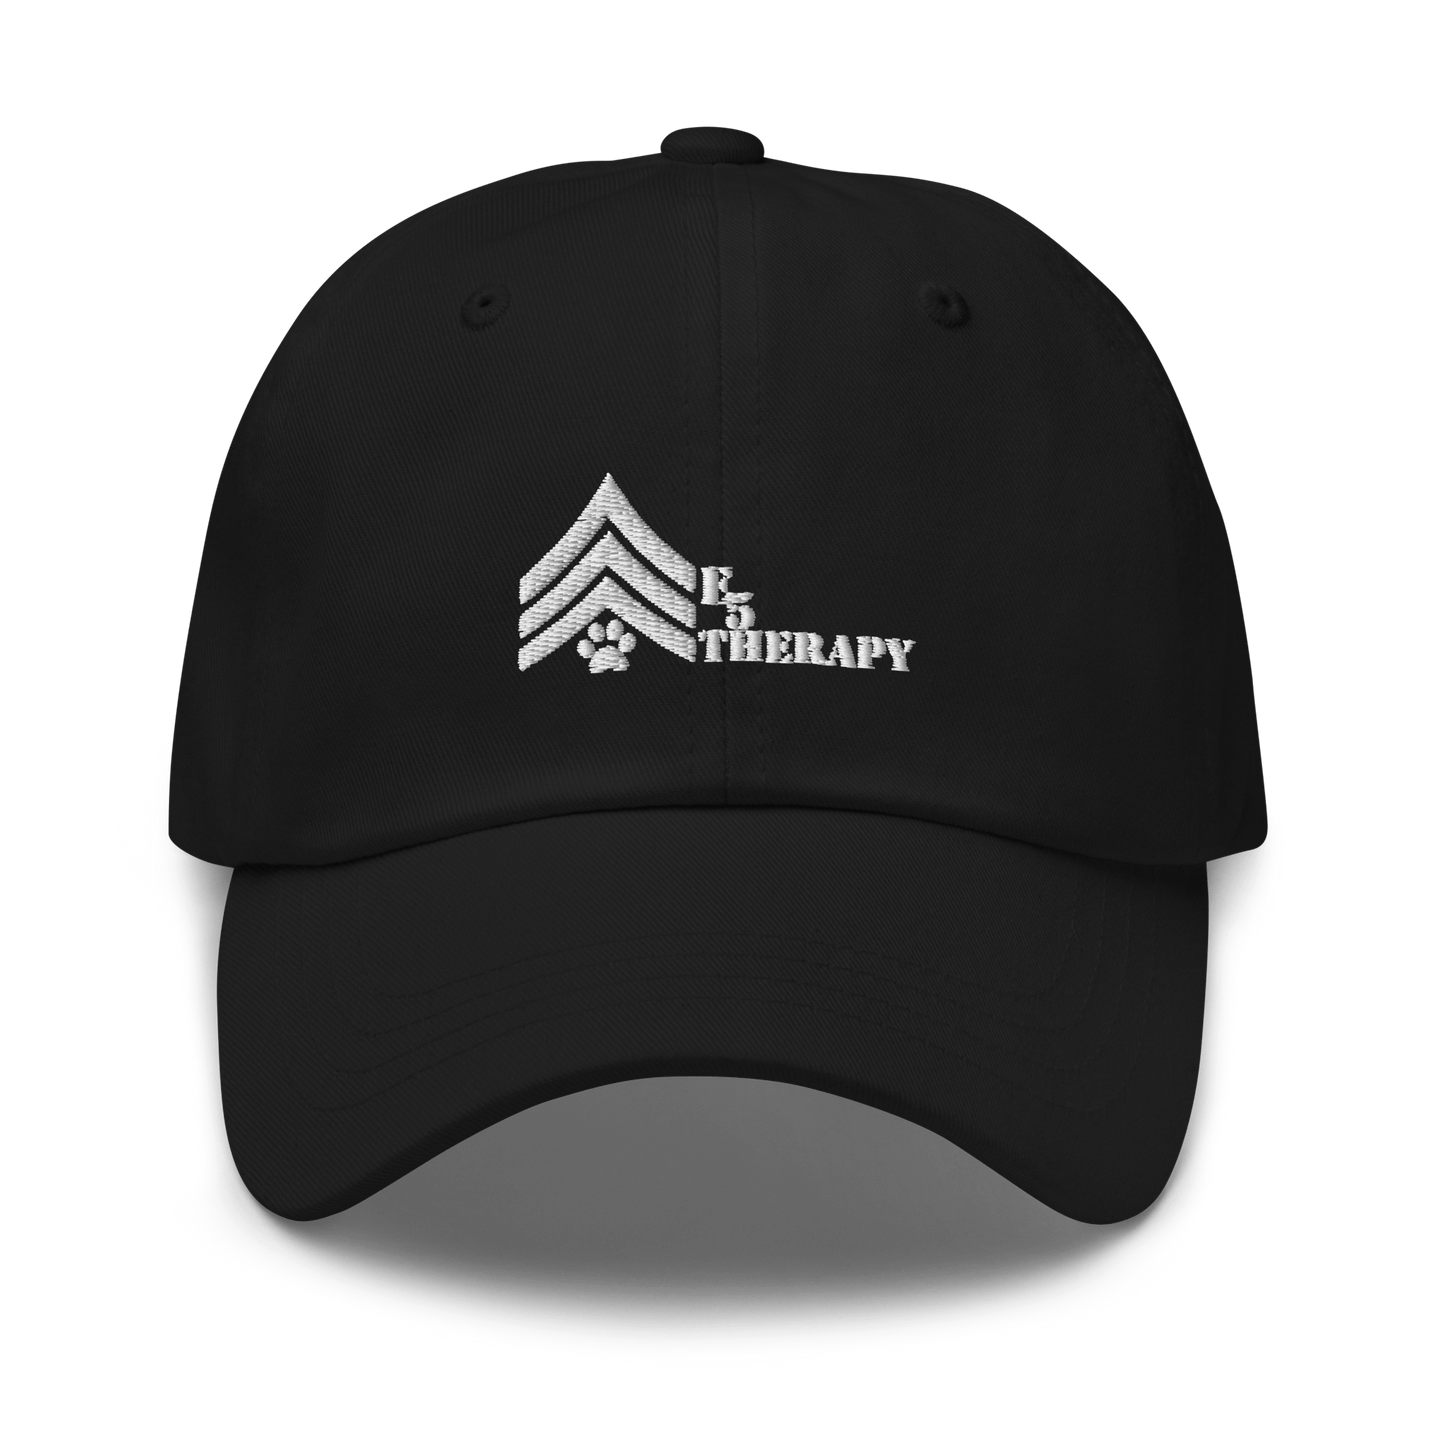 E5 Therapy Group hat - OVR & OUT